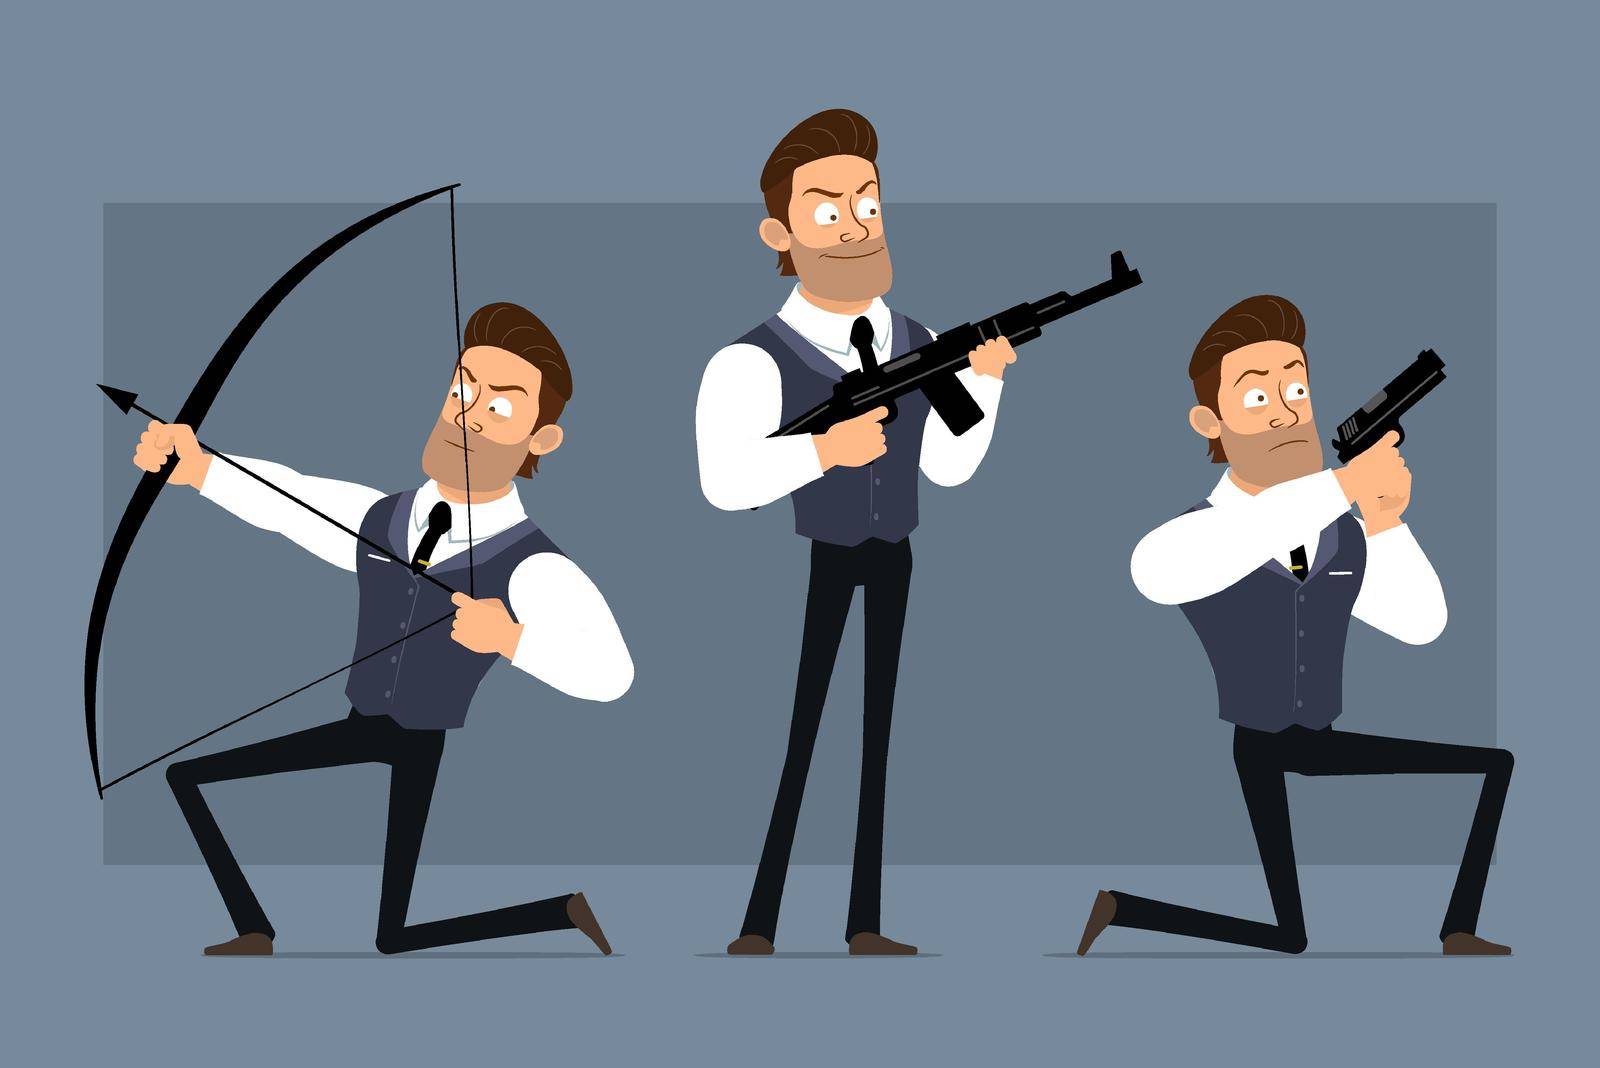 Cartoon flat funny cute strong muscular businessman character with black tie. Ready for animations. Angry boy shooting with pistol, rifle, bow. Isolated on gray background. Big vector icon set.